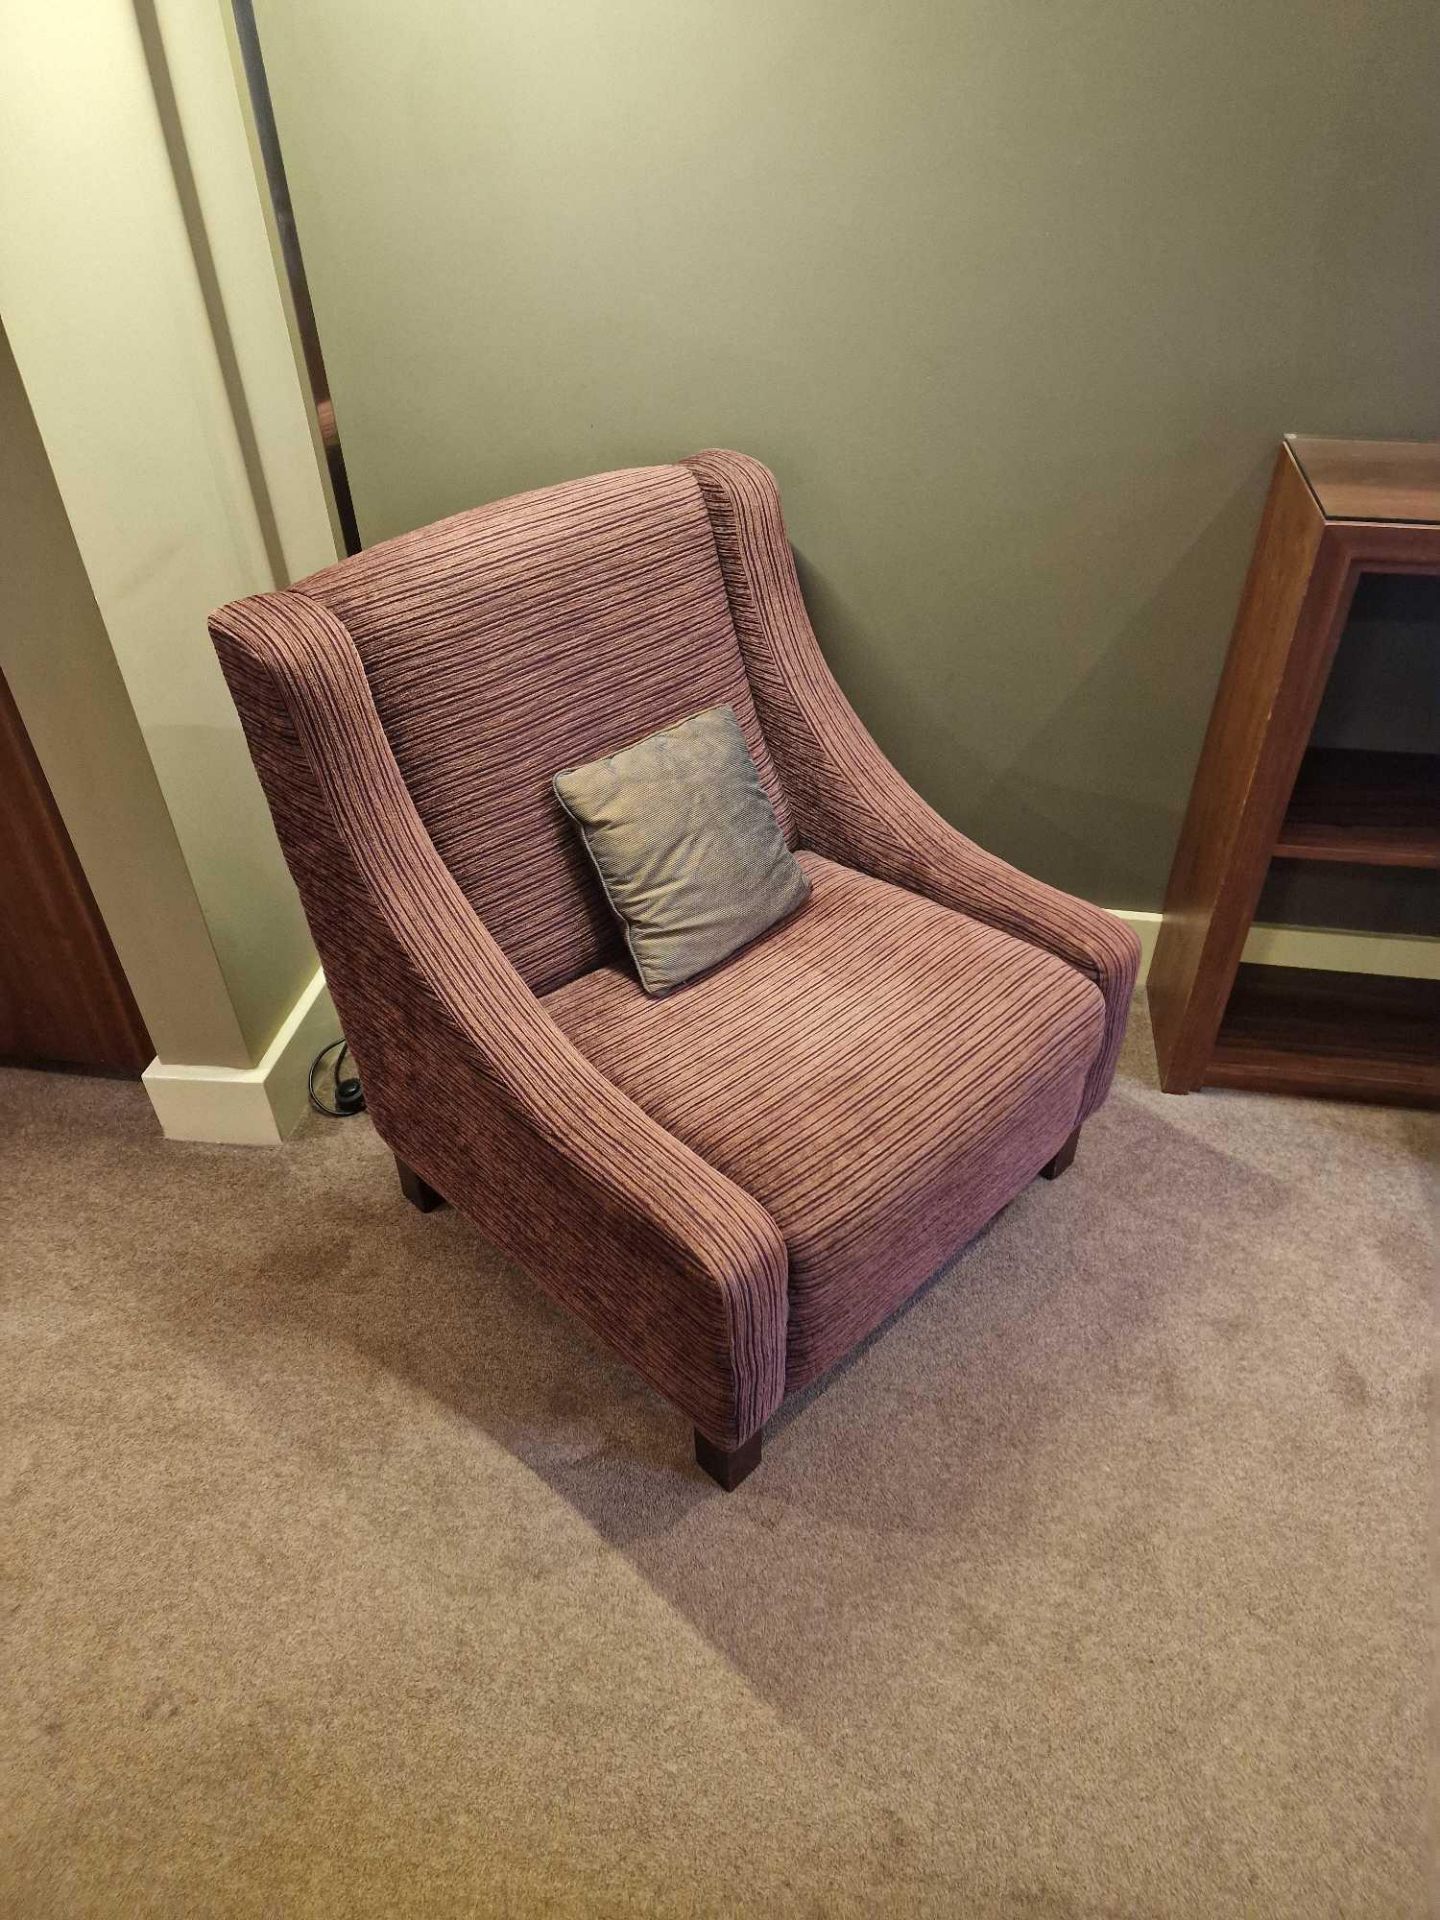 An upholstered relaxer chair 78 x 54 x 86cm ( Location : 126)